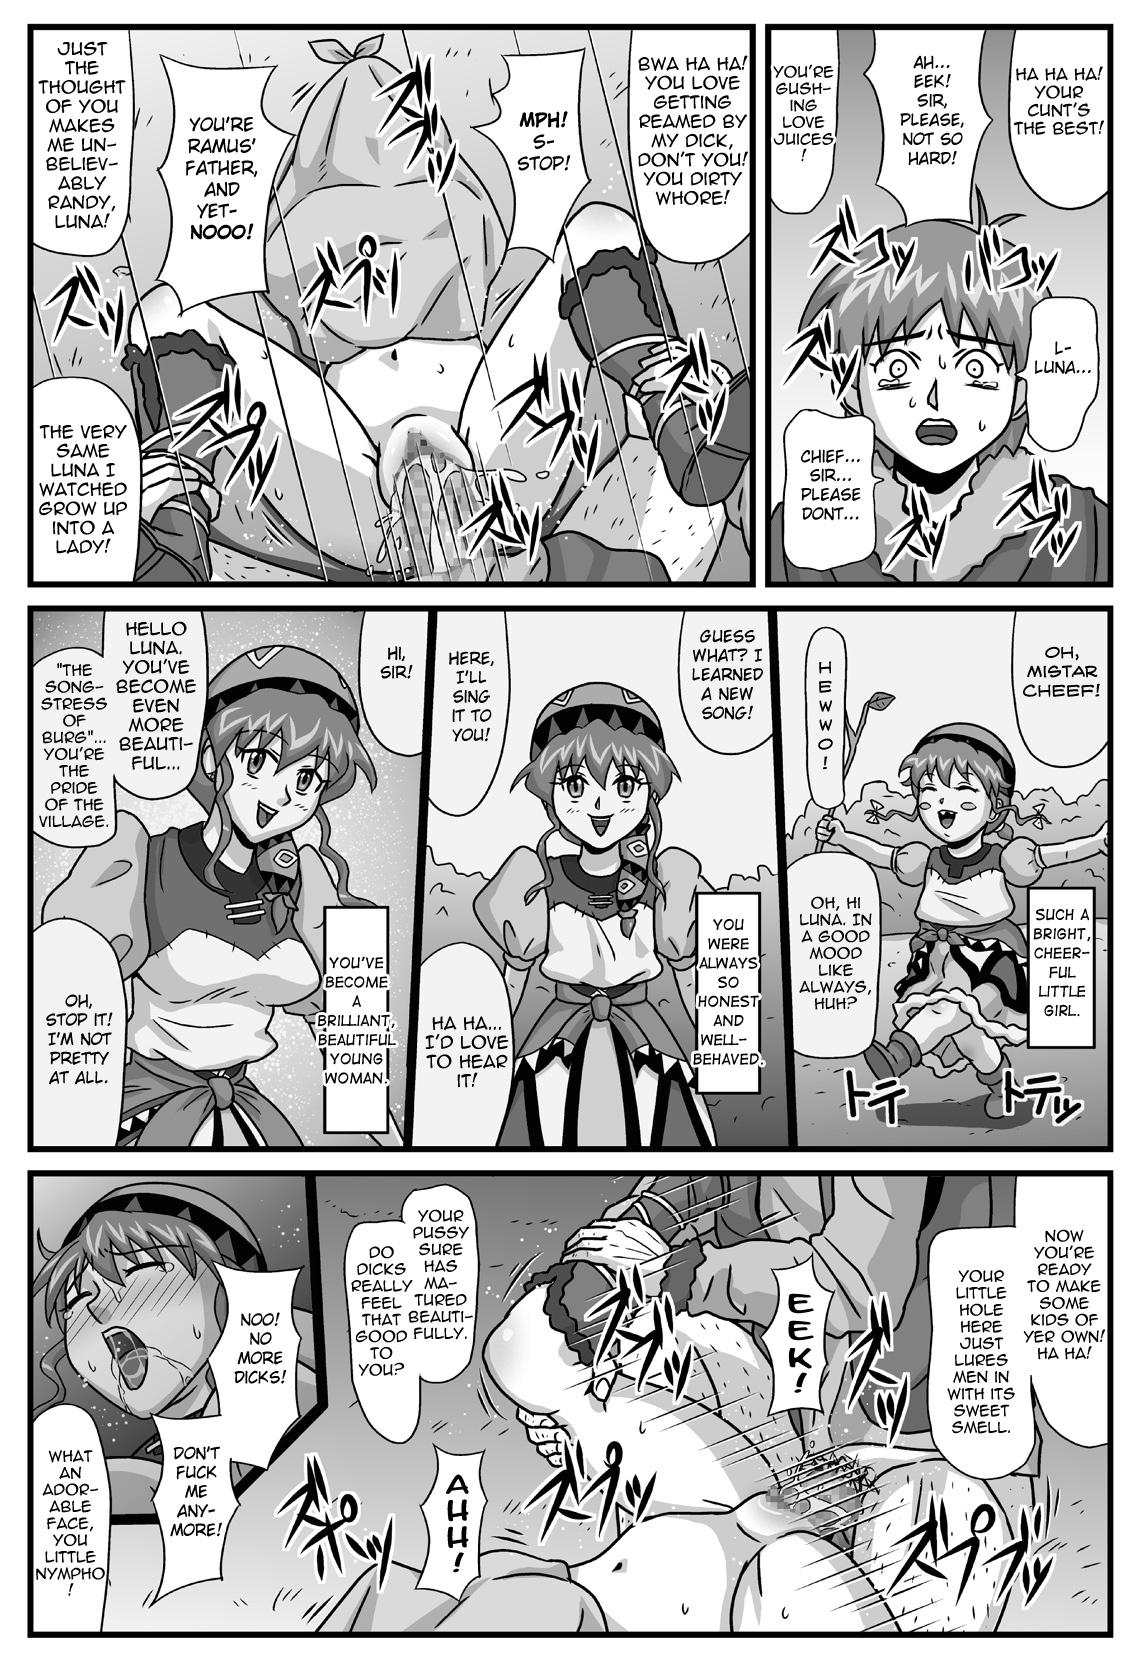 Play The Cumdumpster Princess of Burg 02 - Lunar silver star story Eurobabe - Page 9